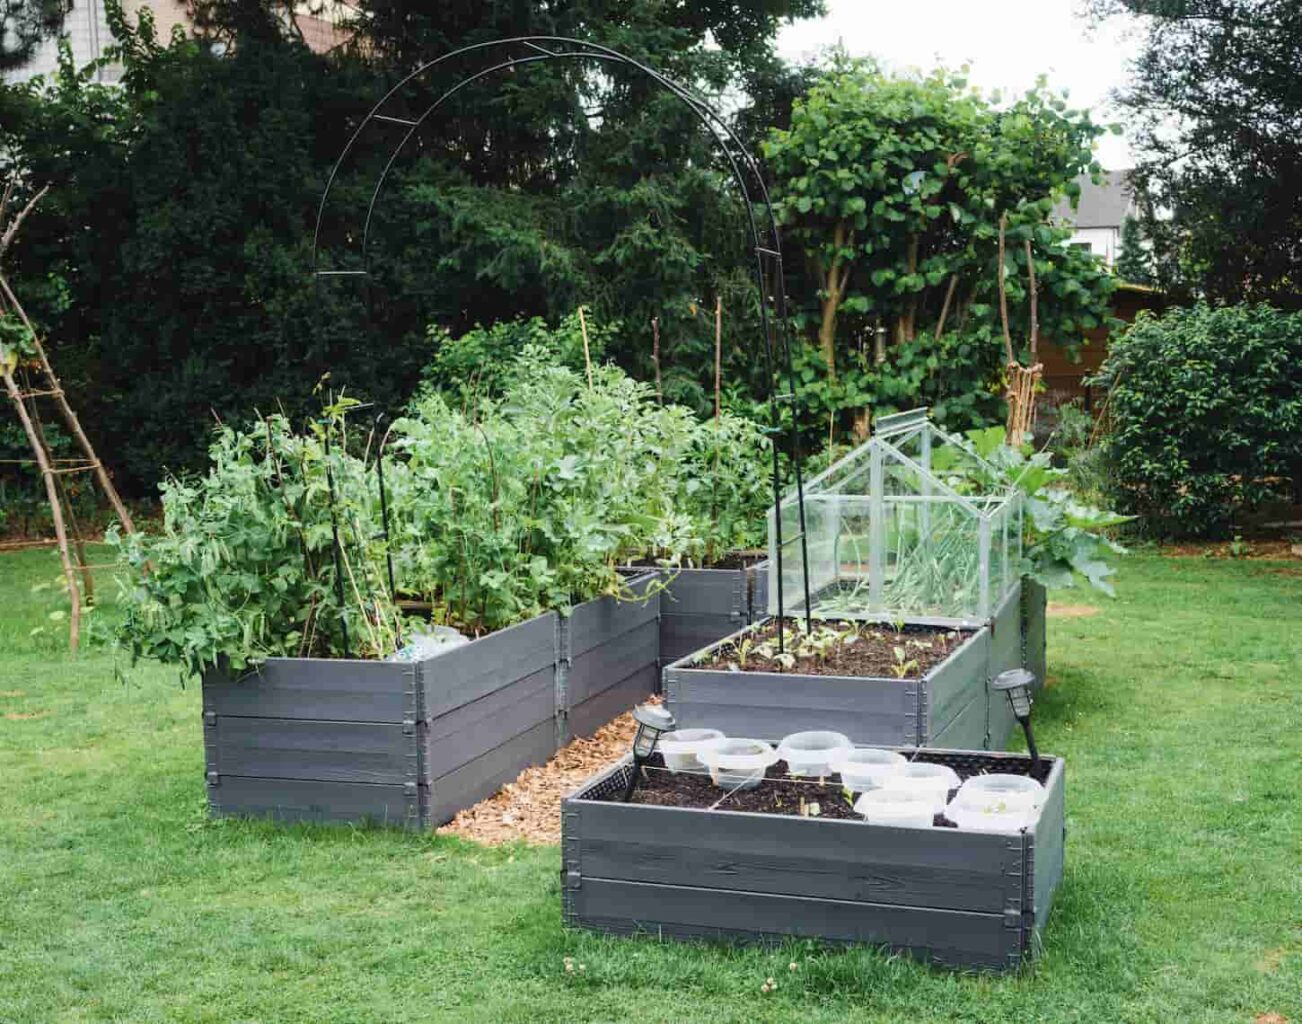 An image of a Garden with an area of raised vegetable beds and a cold frame in the center.